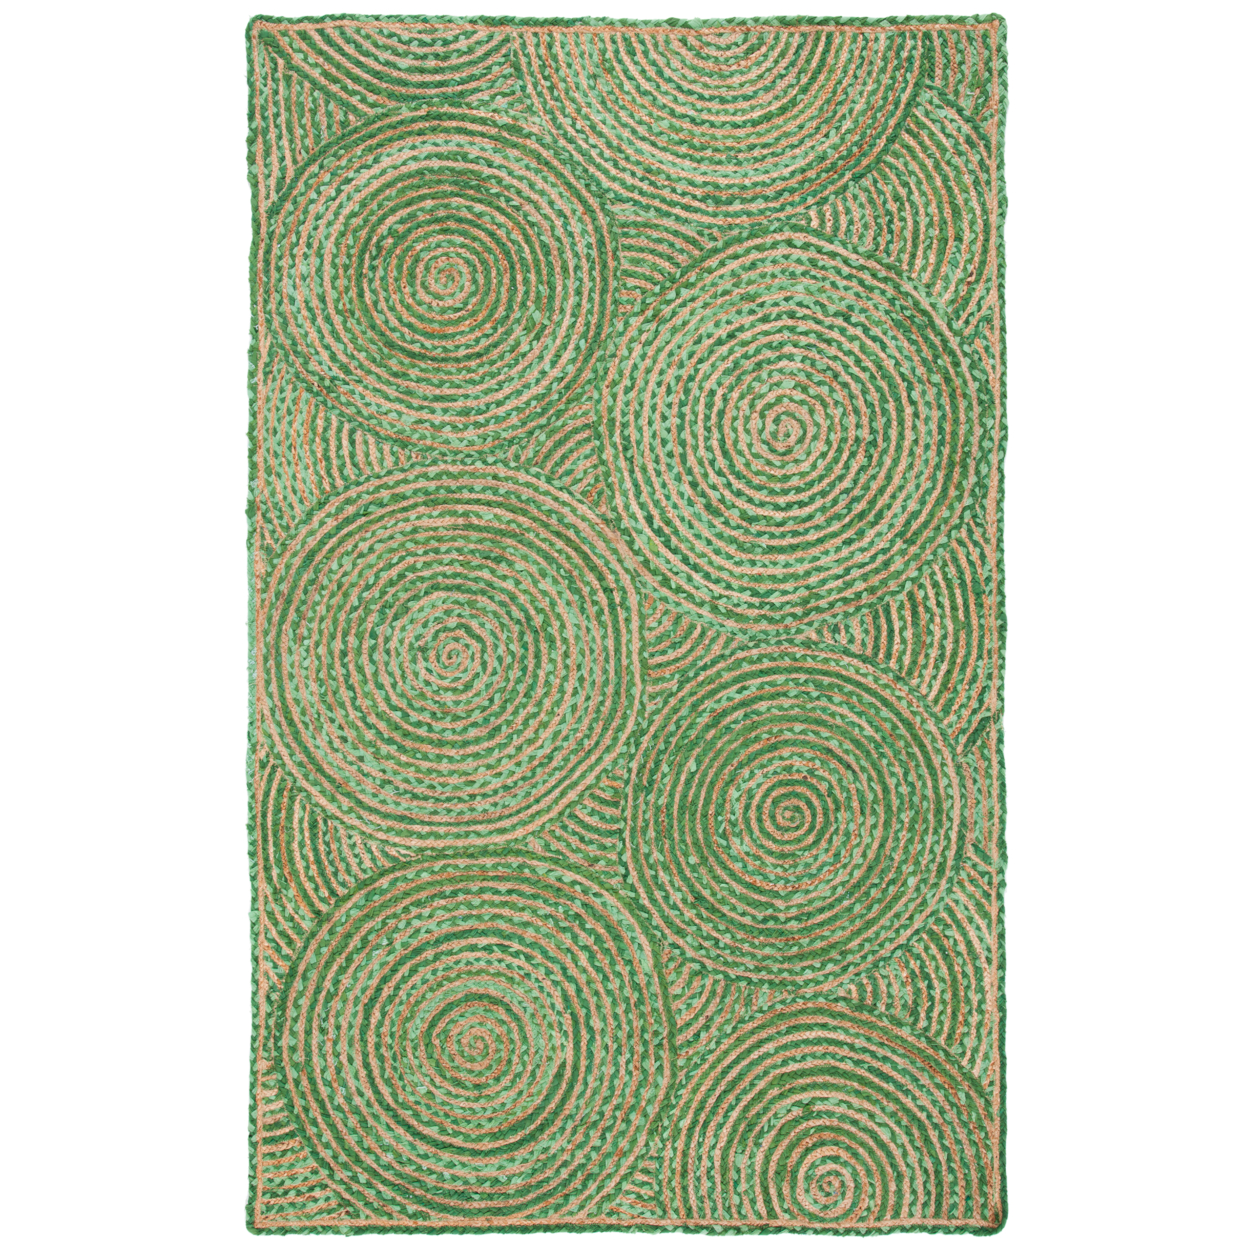 SAFAVIEH Cape Cod CAP203Y Handwoven Green / Natural Rug - 4' X 6' Oval